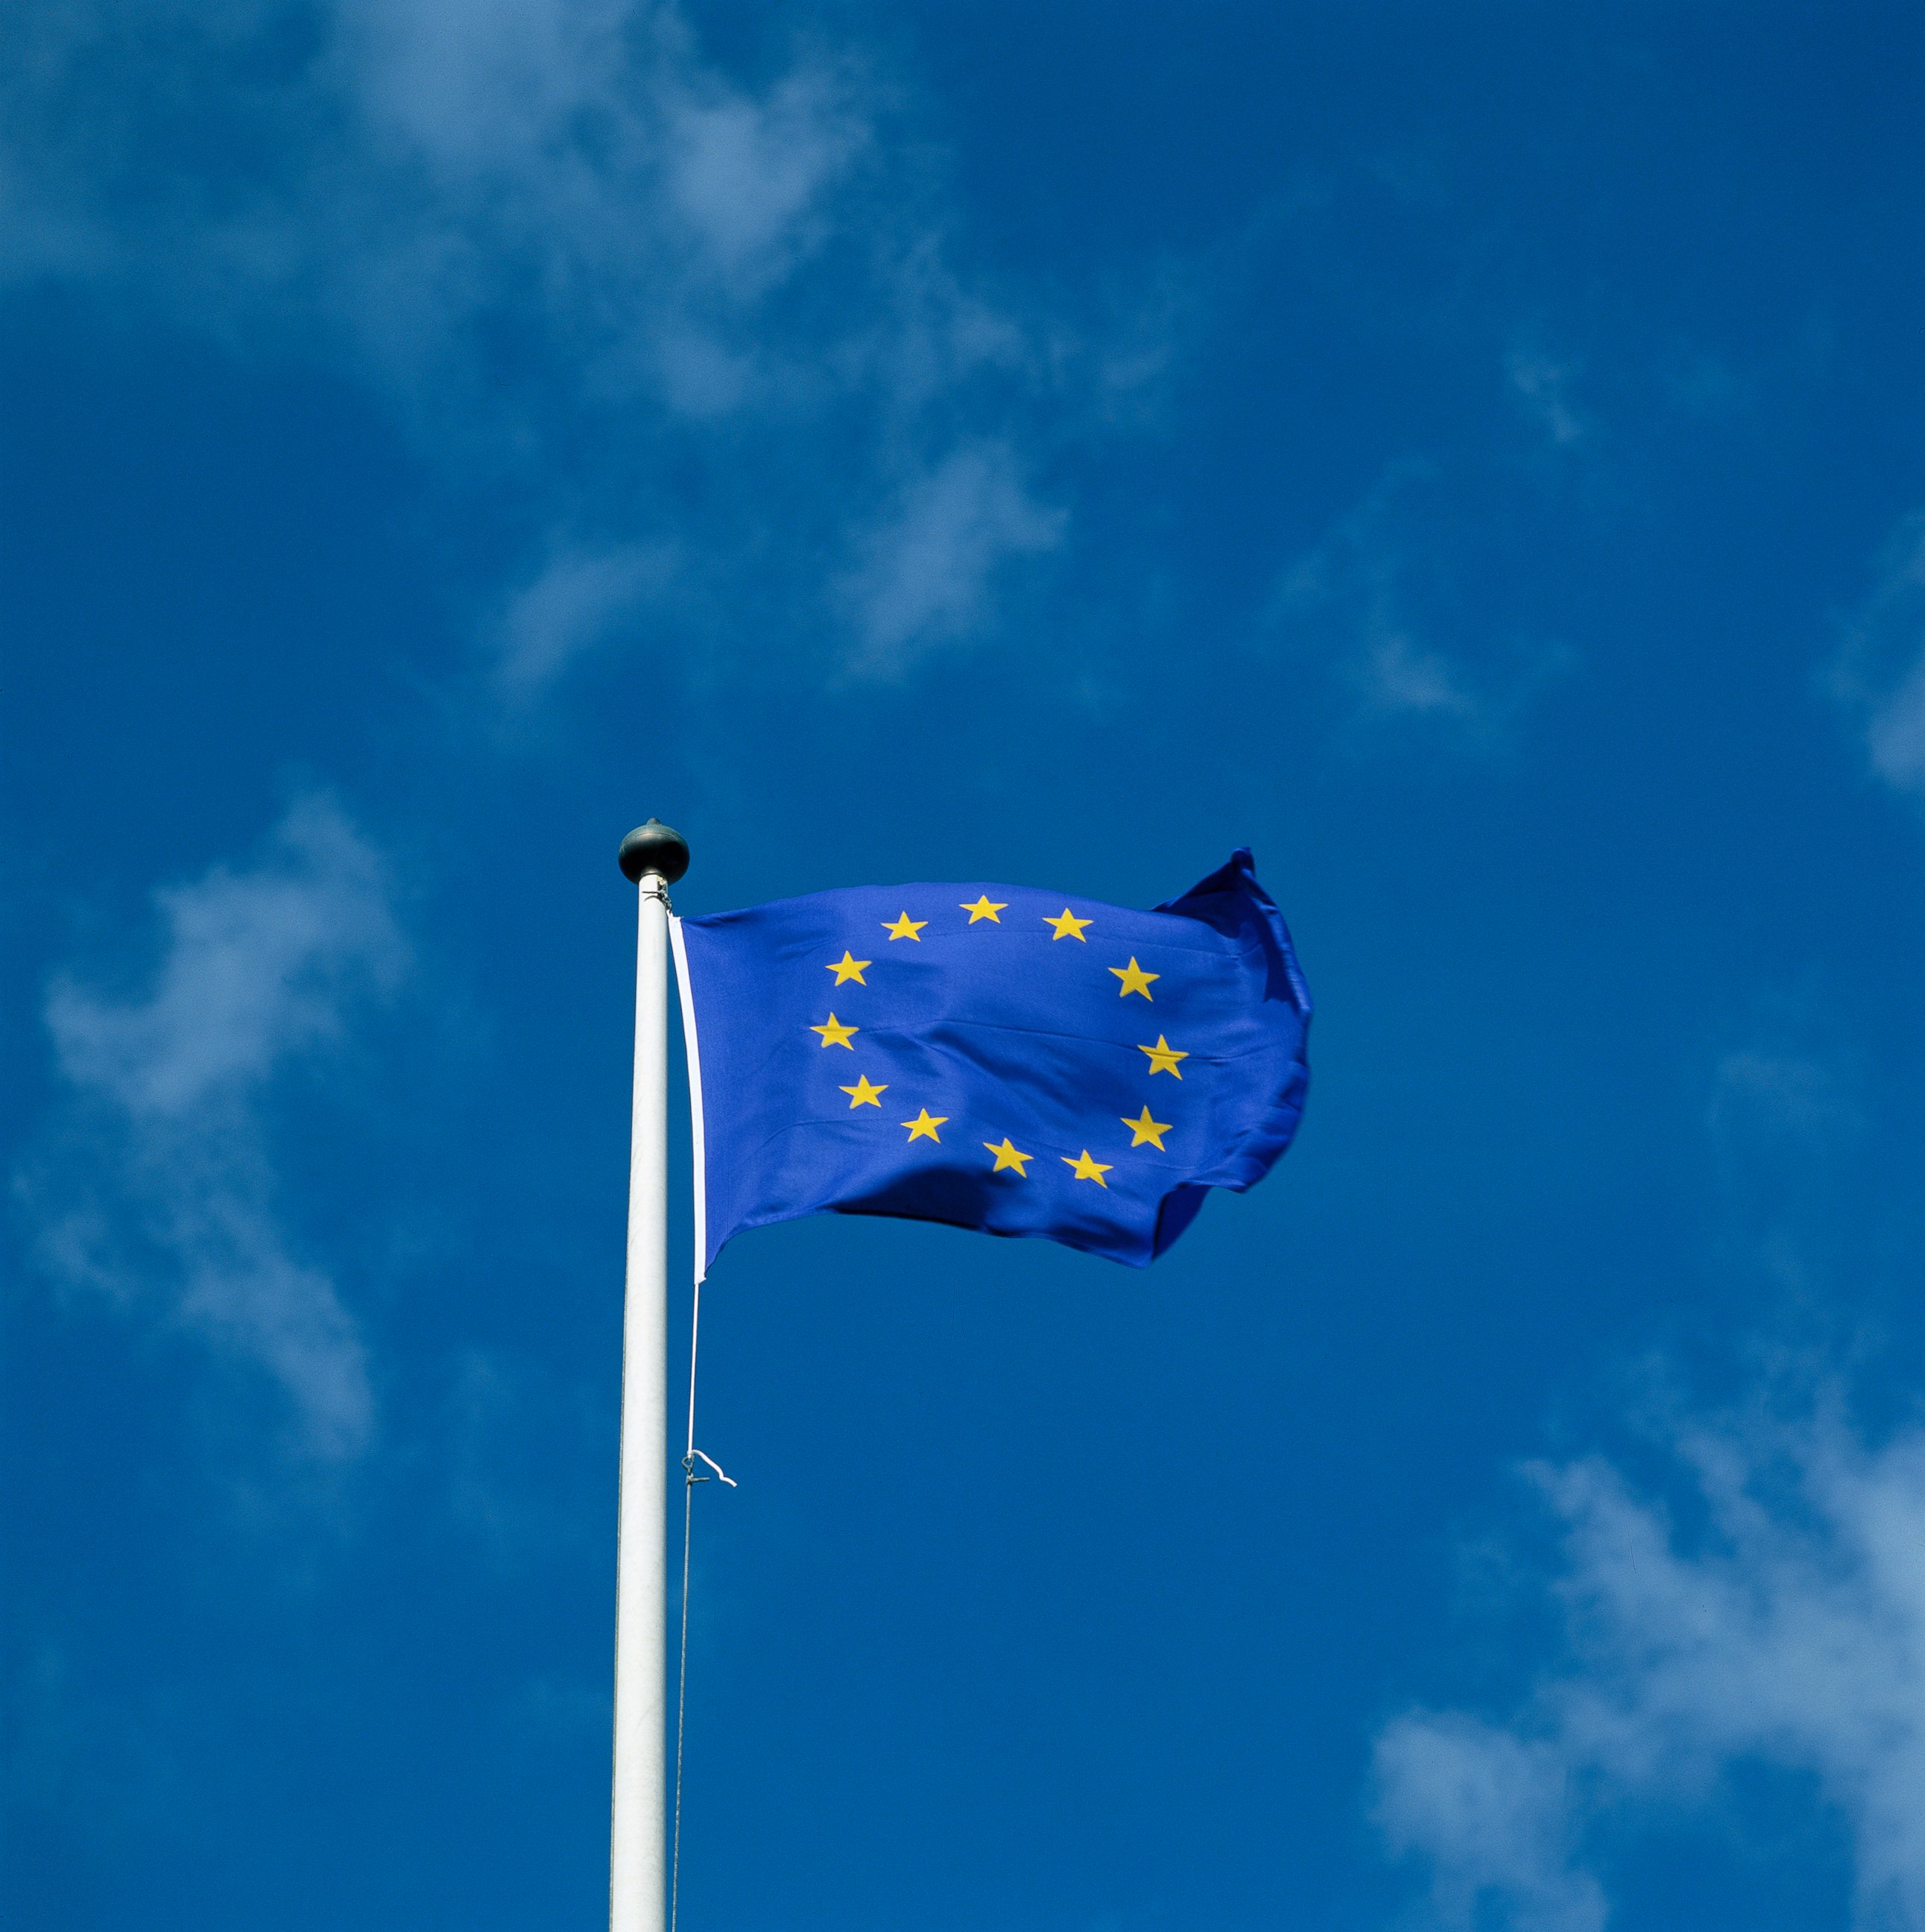 PHOTO: The European Union flag is pictured in this undated stock photo.